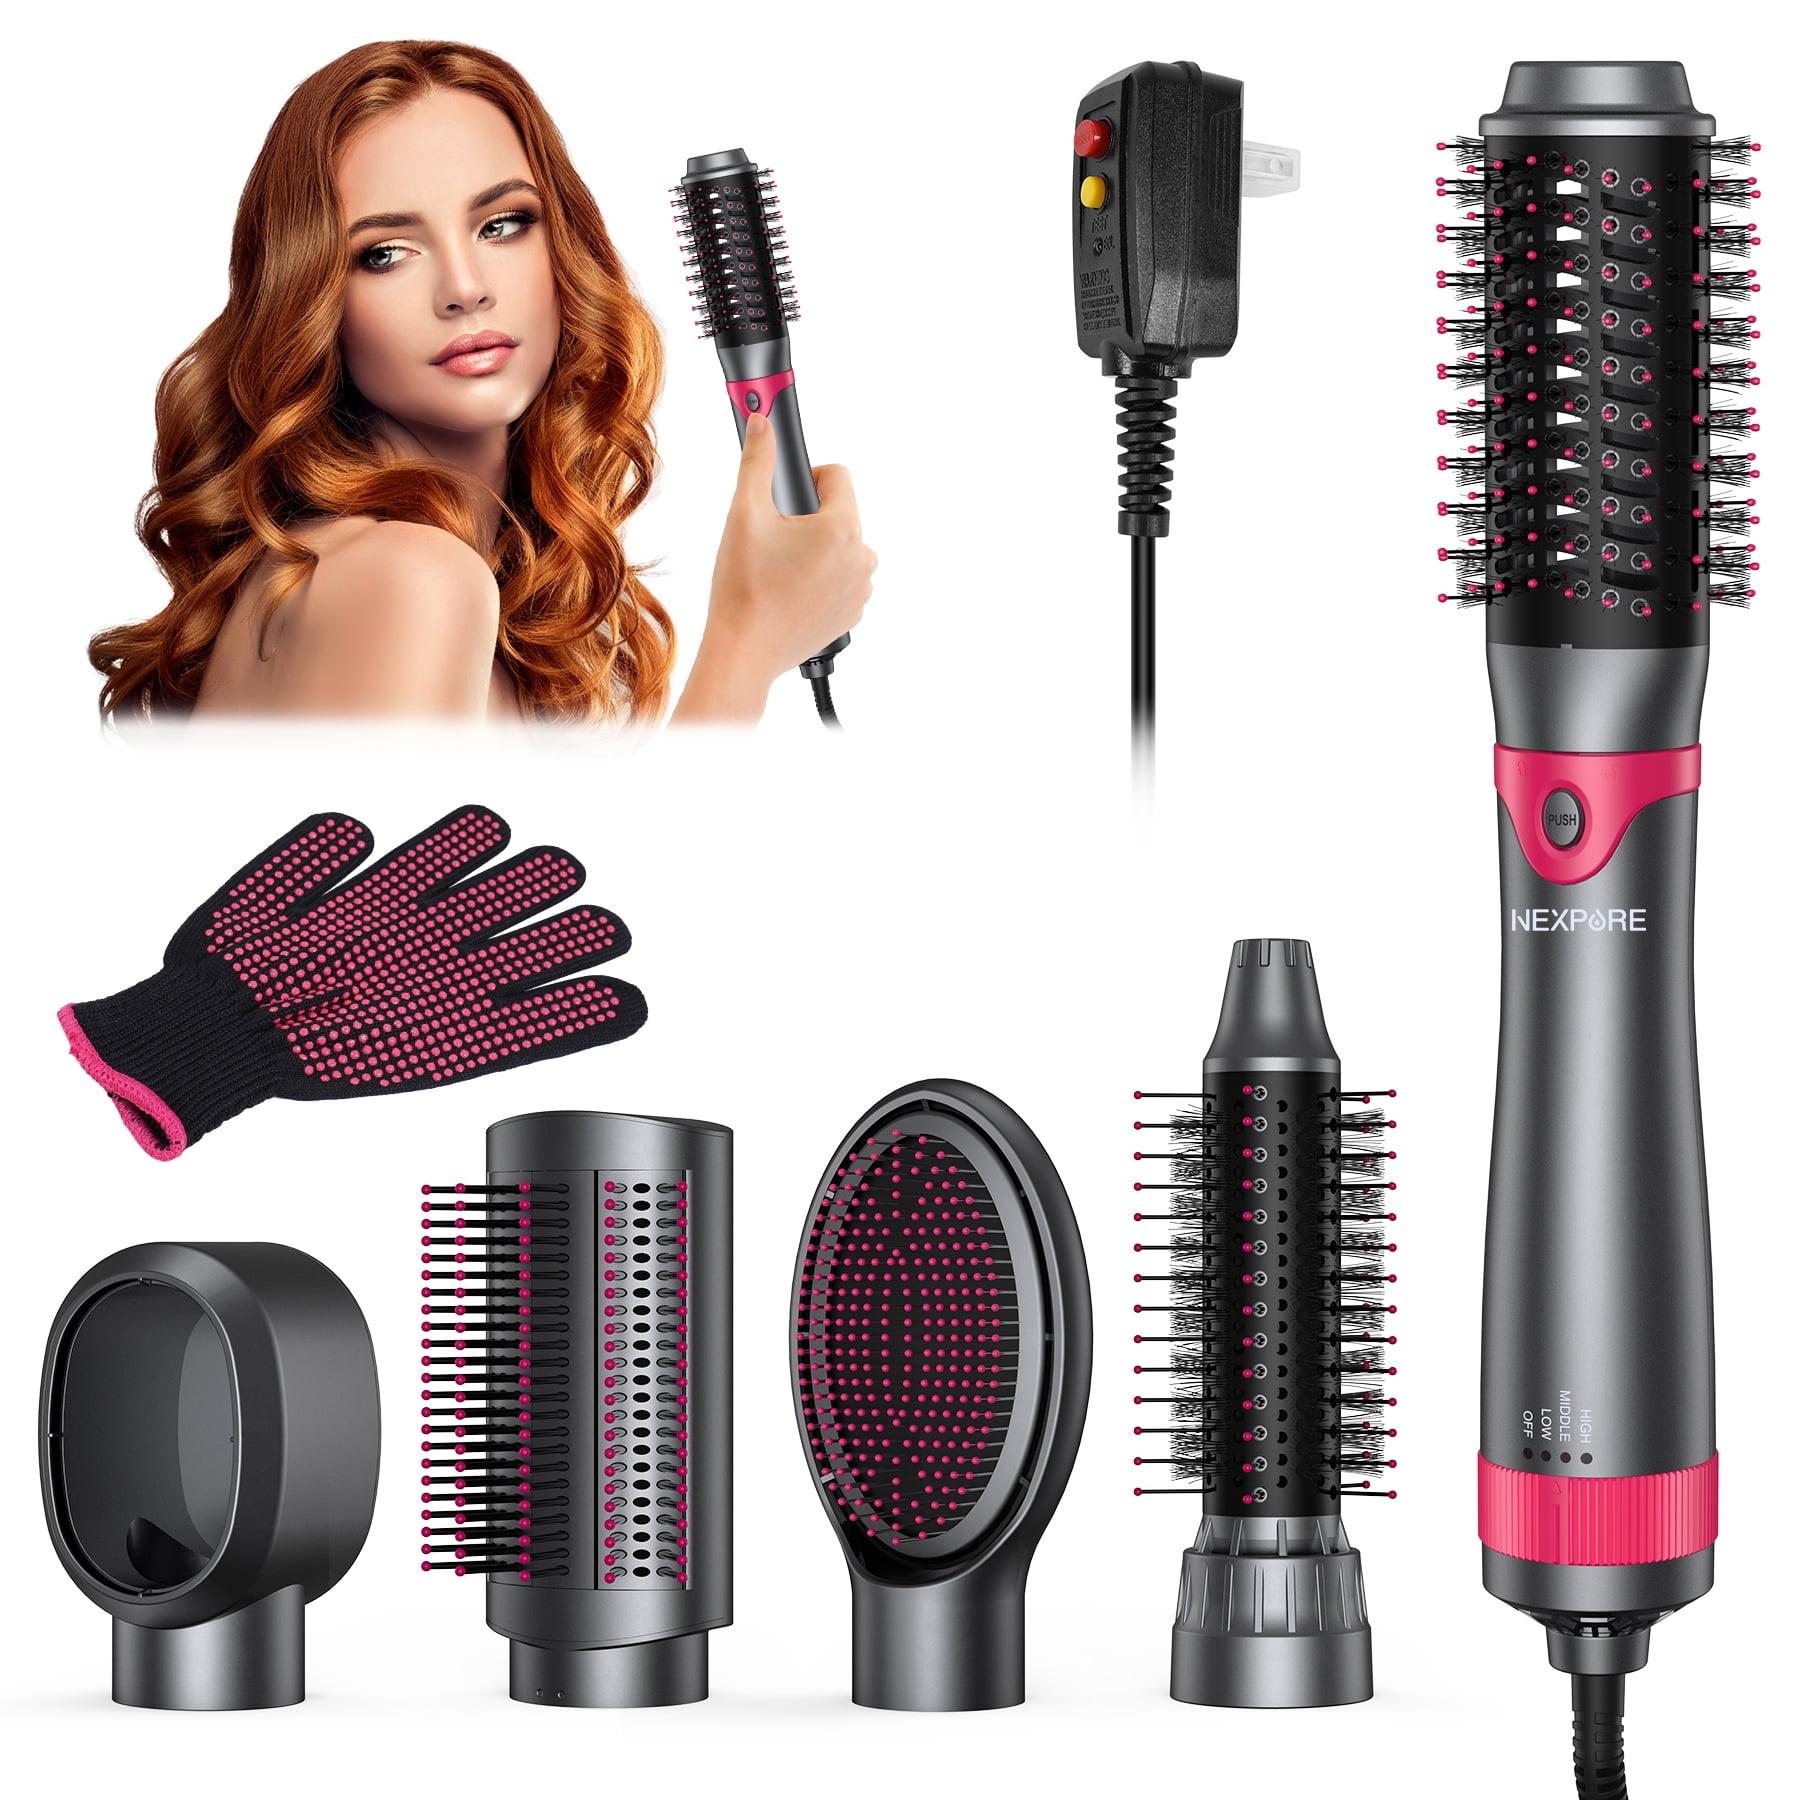 5 In 1 Hair Dryer Styler Air Wrap Brush Professional Electric Hot Air Brush  Styling Tool